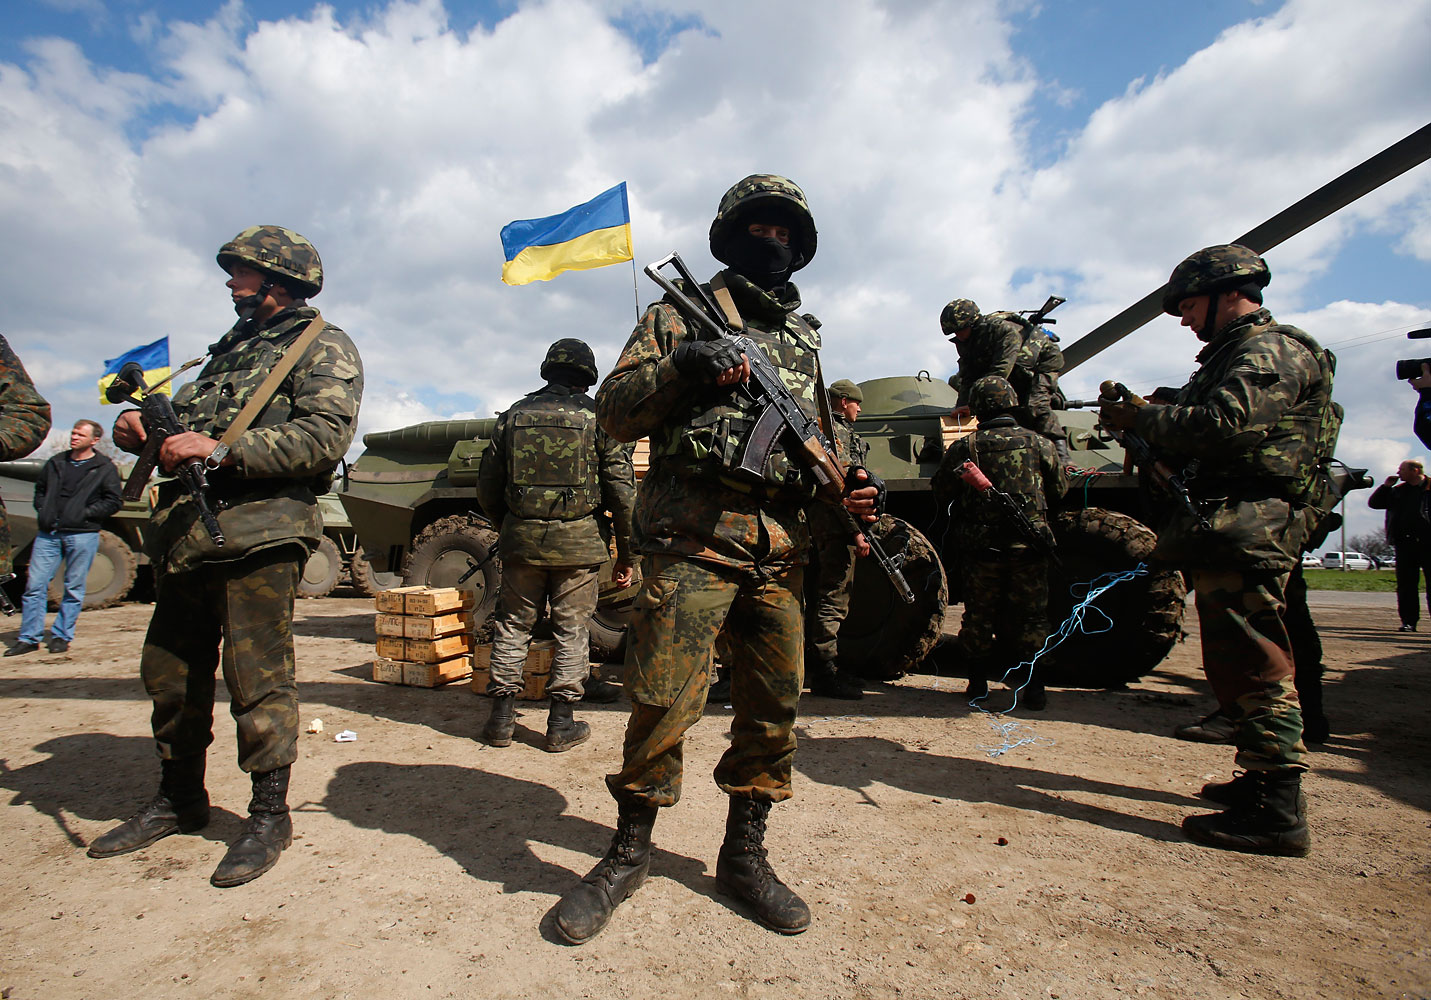 Ukrainian army troops receive ammunition, with a Ukrainian flag in the back, in a field on the outskirts of Izyum, Eastern Ukraine, April 15, 2014.